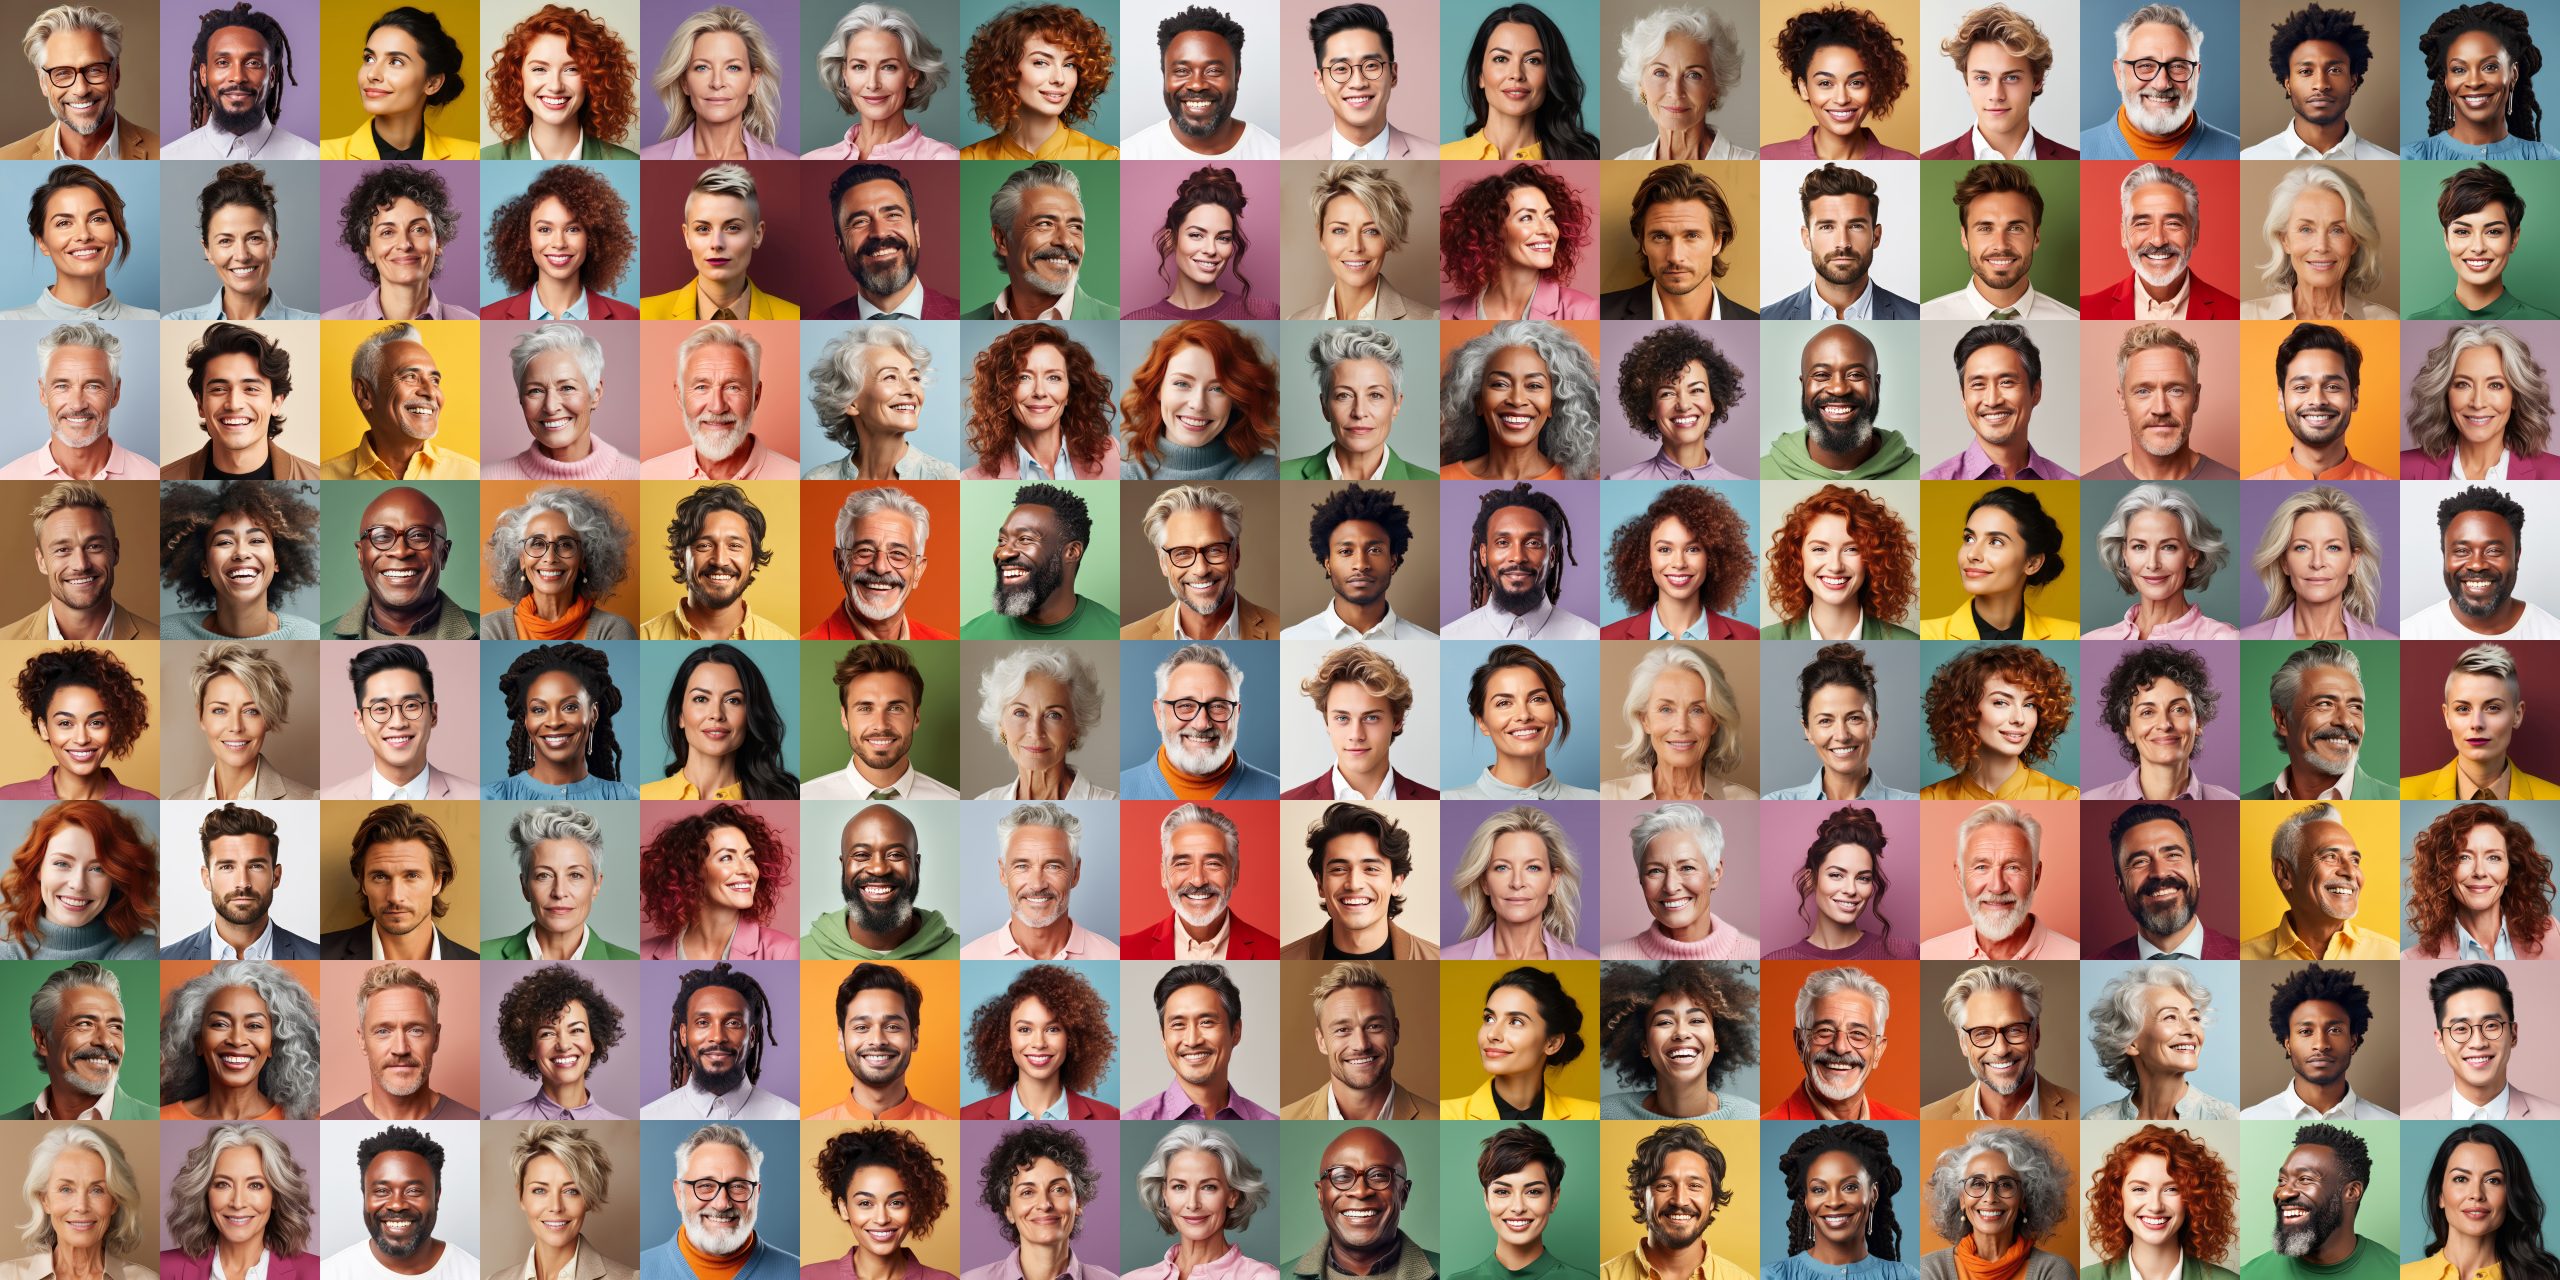 Panorama of adult people of many age groups in front of colorful backgrounds